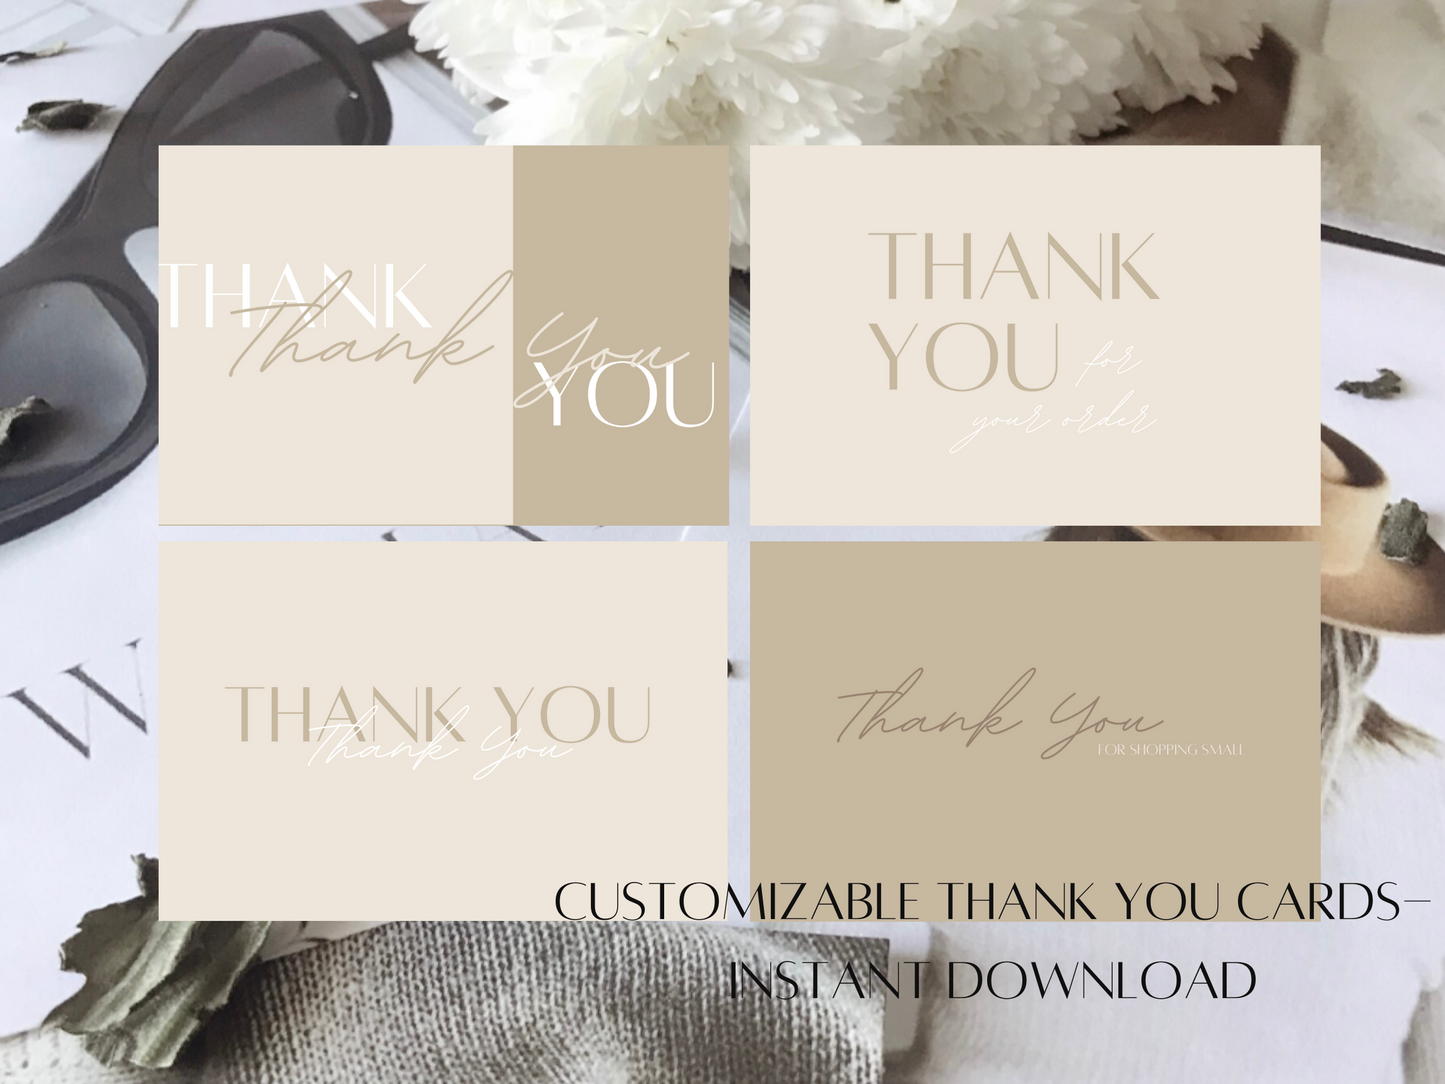 Customizable Thank You Cards- Instant Download- Canva Template